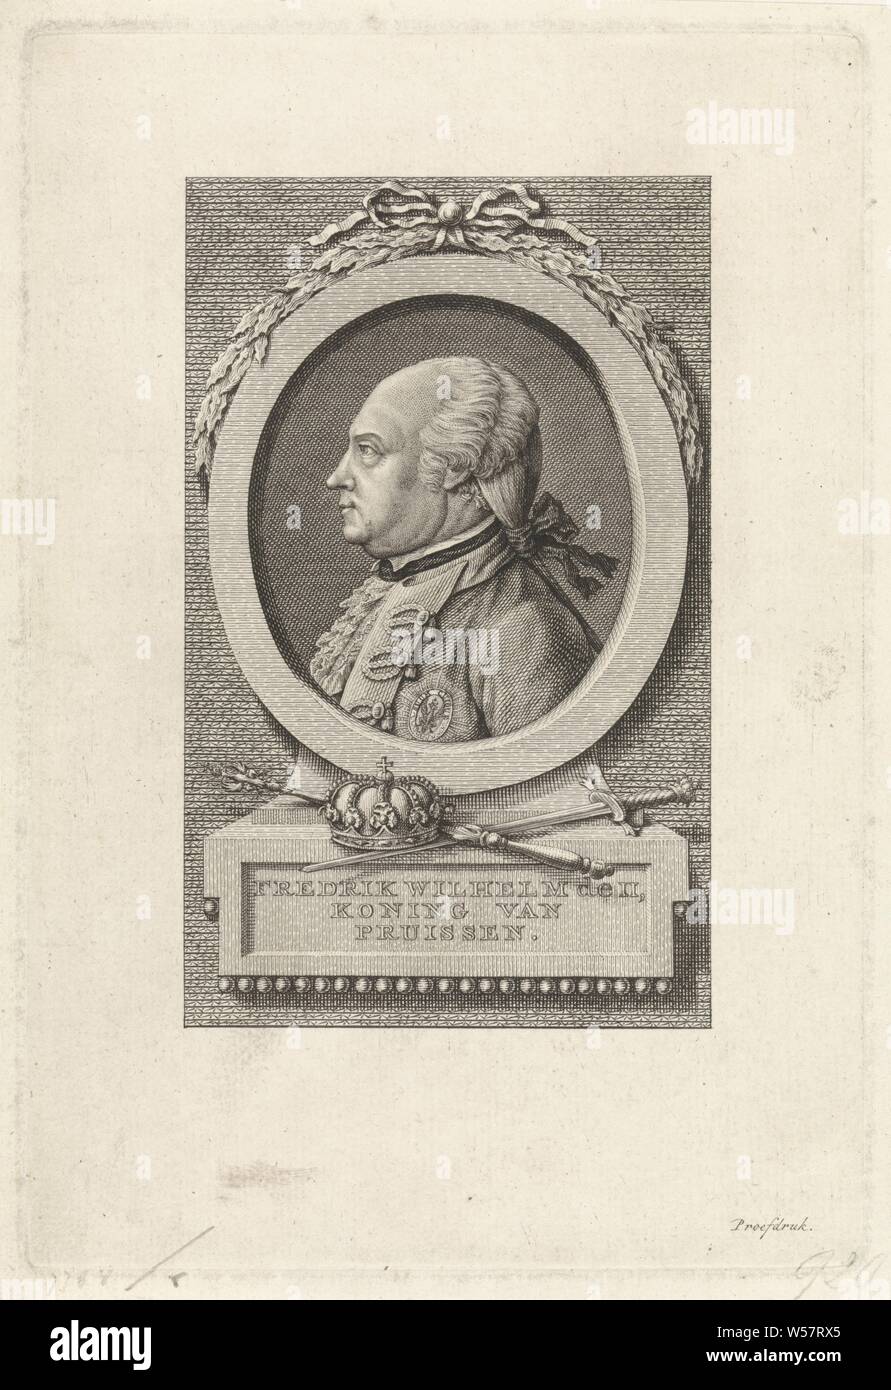 Portrait of Frederick William II, King of Prussia, Portrait bust of Frederick William II, King of Prussia. He is wearing a bow in her hair. Underneath his portrait two swords and a crown. In the plaque a three-line text, Frederick William II (King of Prussia), Theodoor Koning, Amsterdam, 1788, paper, engraving, h 205 mm × w 137 mm Stock Photo